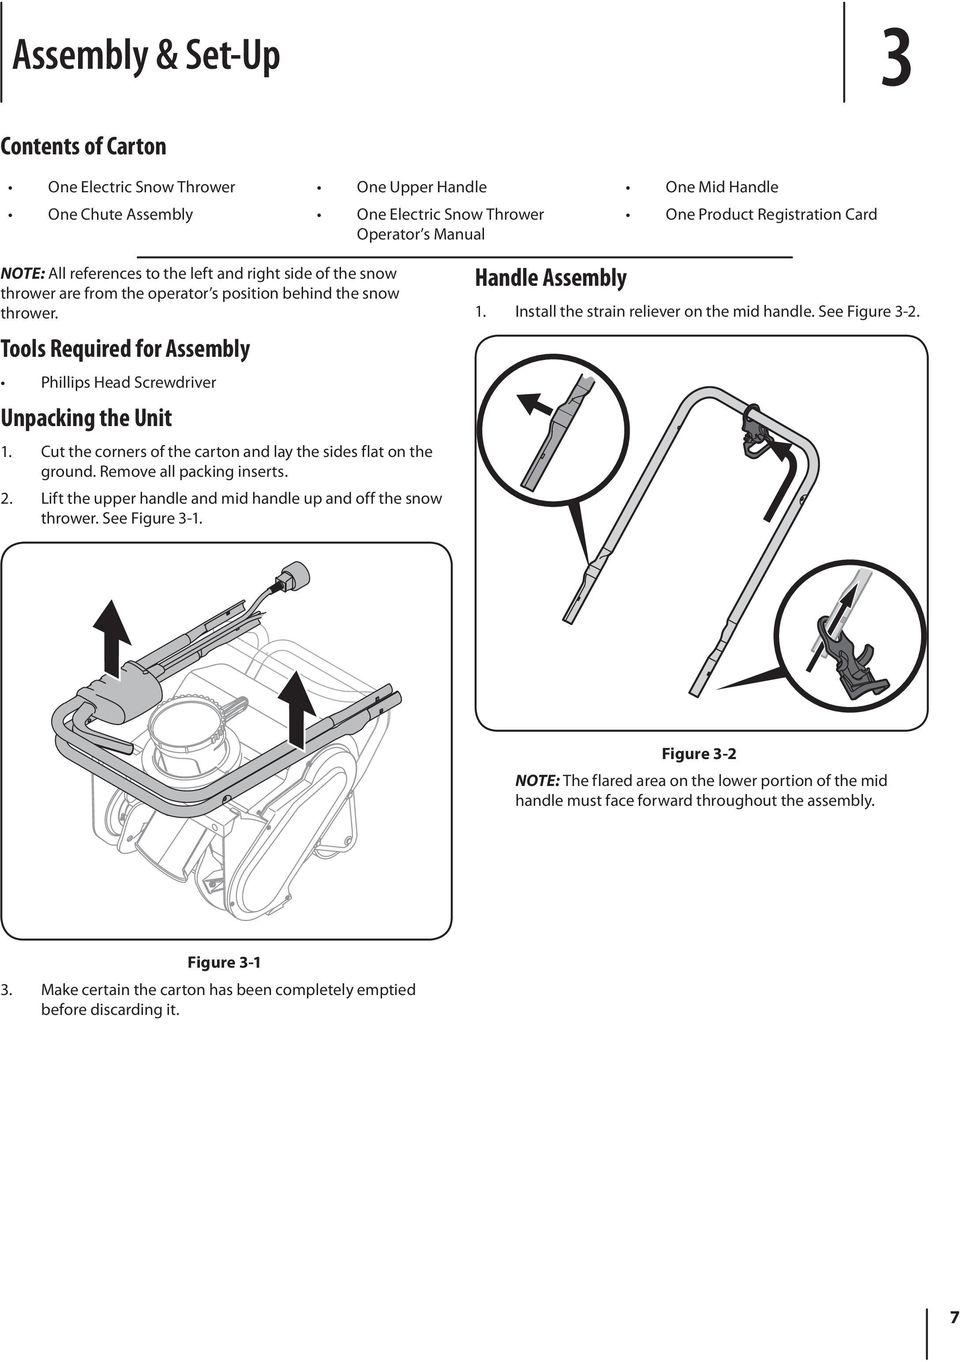 Cut the corners of the carton and lay the sides flat on the ground. Remove all packing inserts. 2. Lift the upper handle and mid handle up and off the snow thrower. See Figure 3-1. Handle Assembly 1.